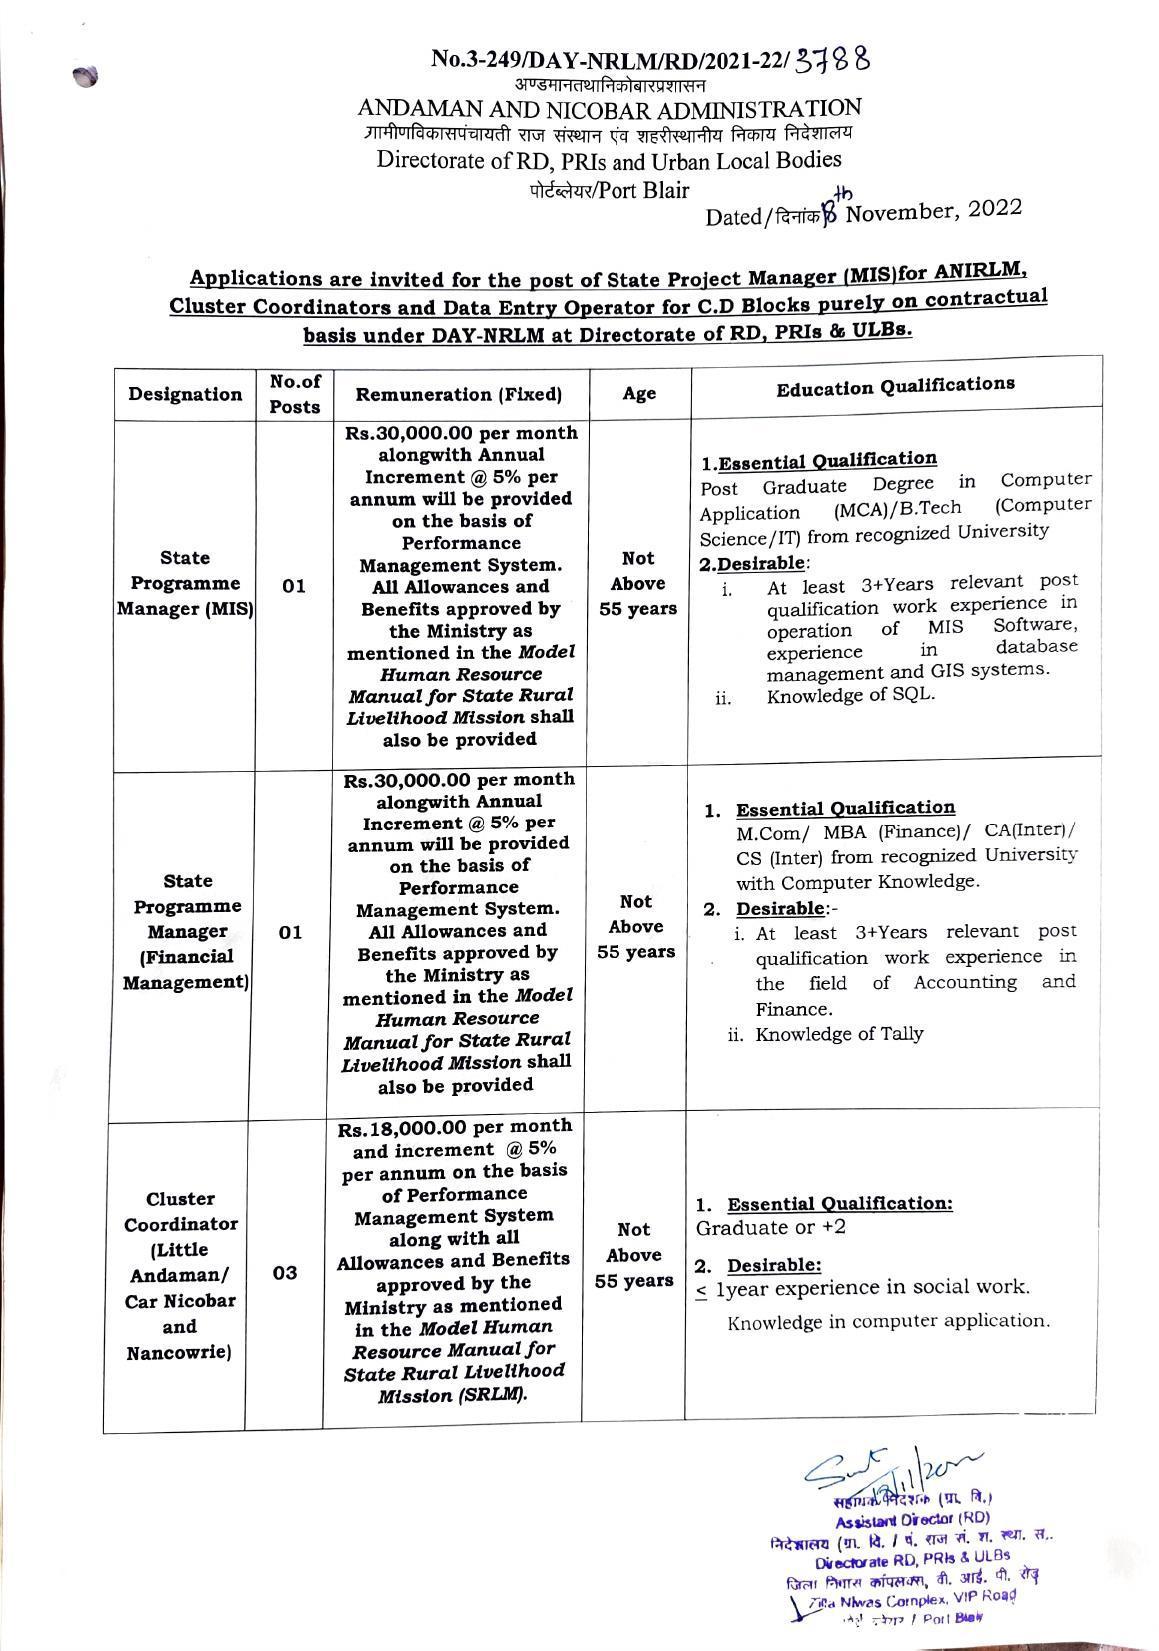 Andaman & Nicobar Administration Invites Application for 5 State Project Manager, Cluster Coordinator, More Vacancies Recruitment 2022 - Page 5